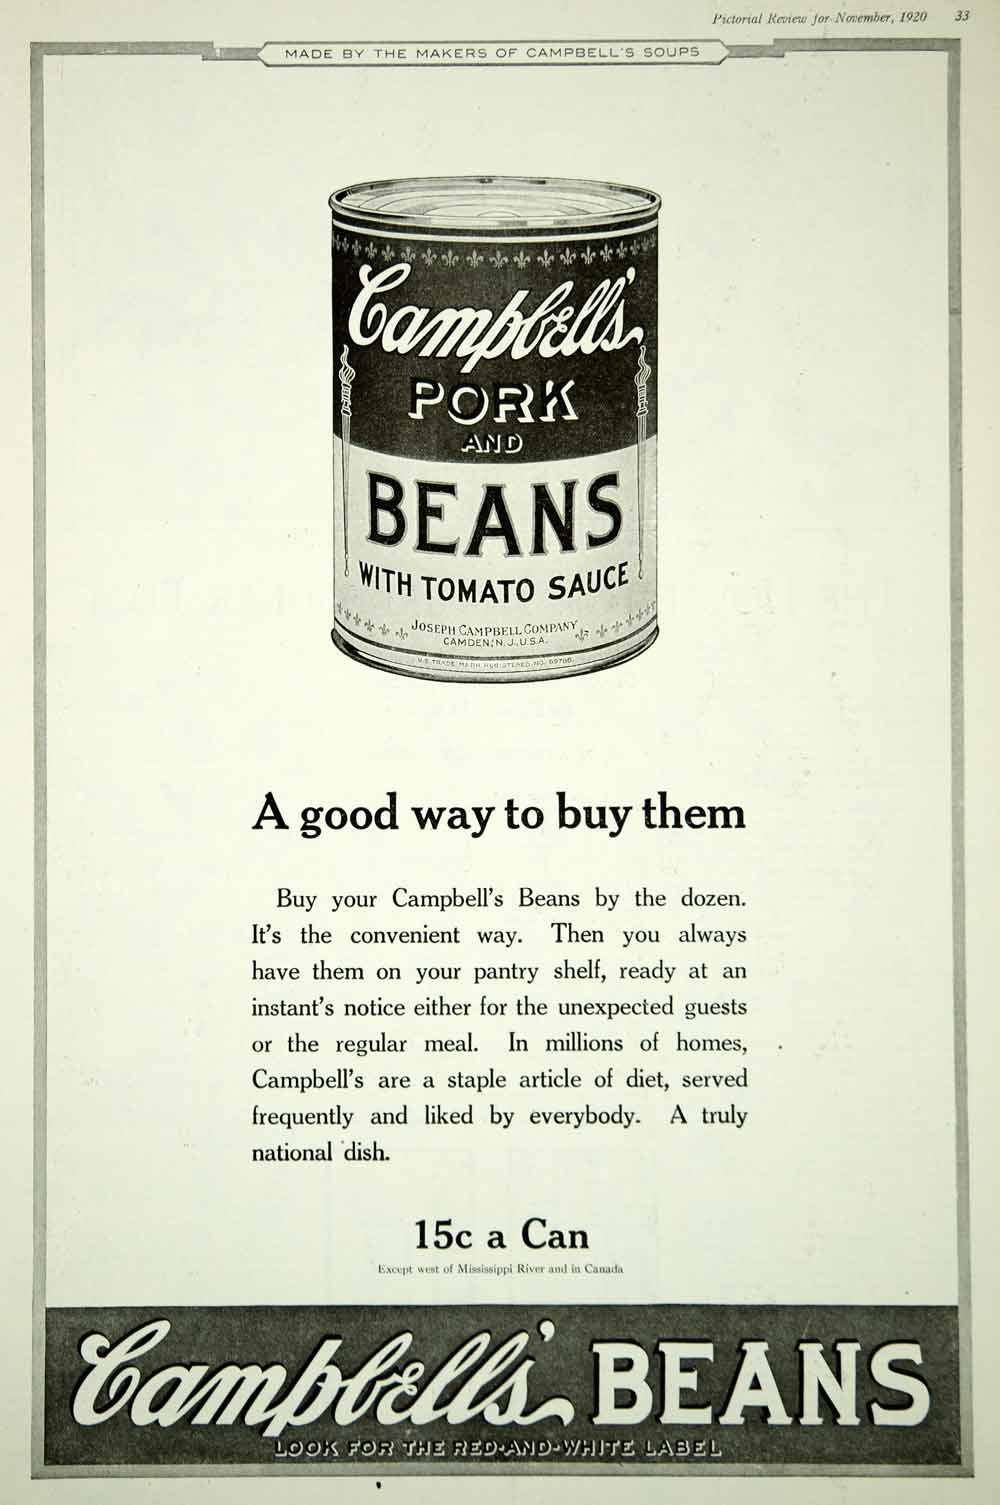 1920 Ad Vintage Campbell's Pork Beans Tomato Sauce Can Canned Food Nutrition